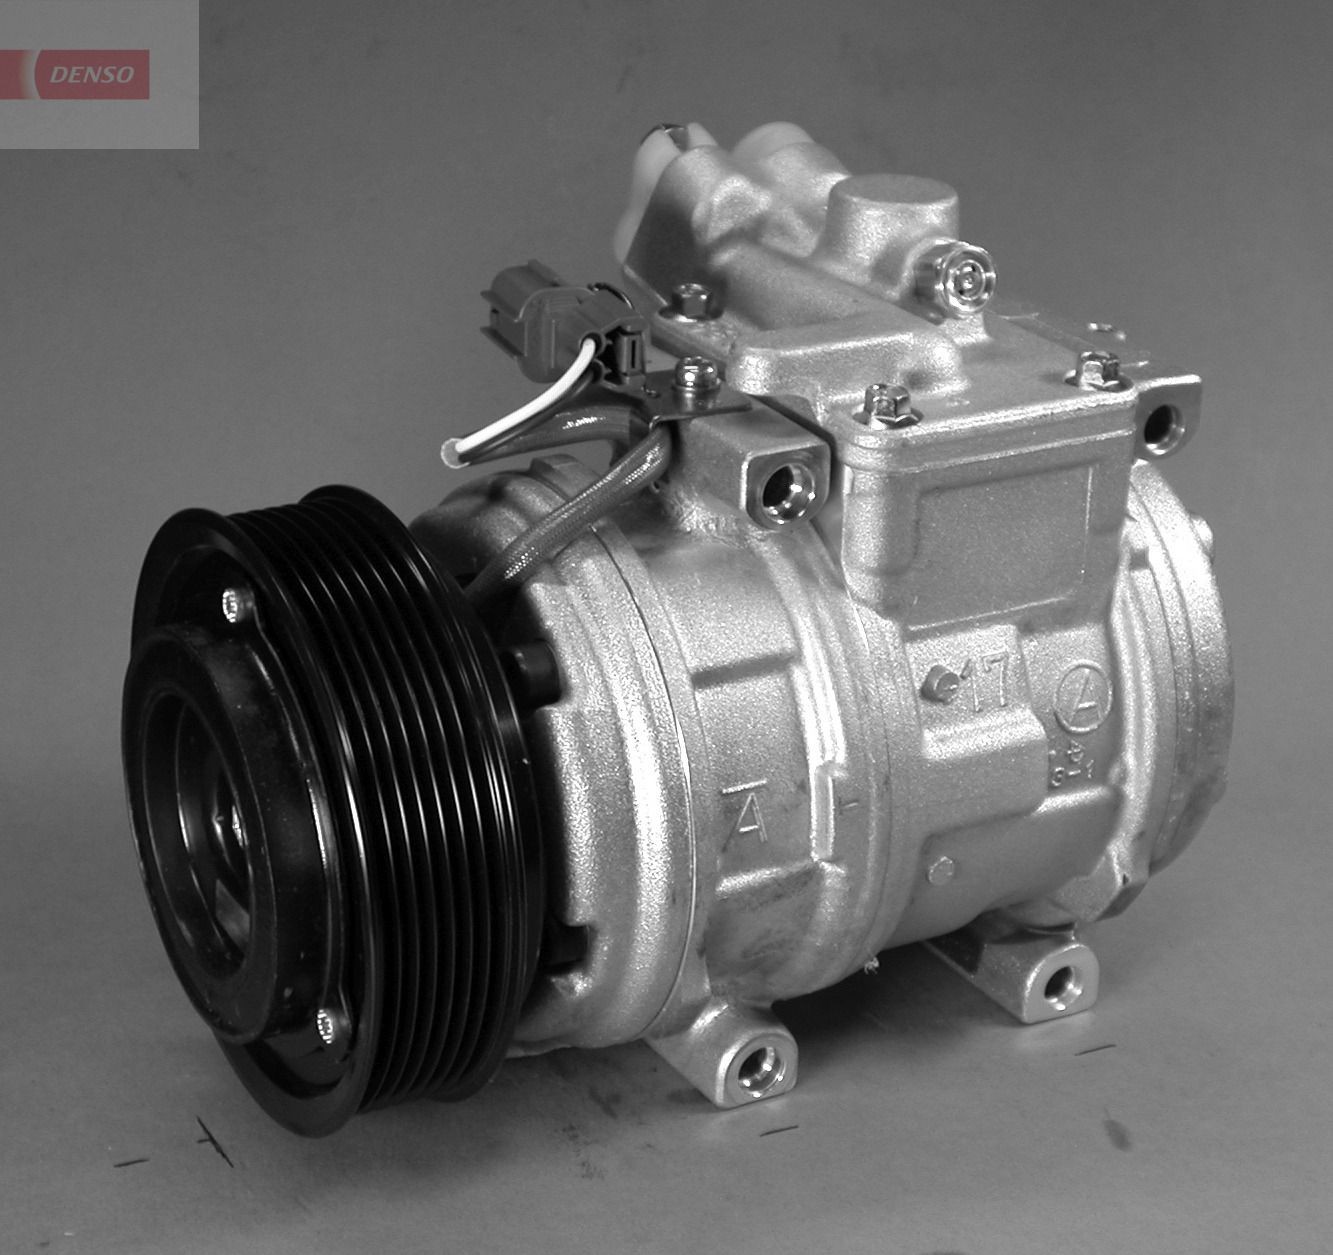 DCP14006 DENSO Air con compressor LAND ROVER 10PA17C, 12V, PAG 46, R 134a, with magnetic clutch